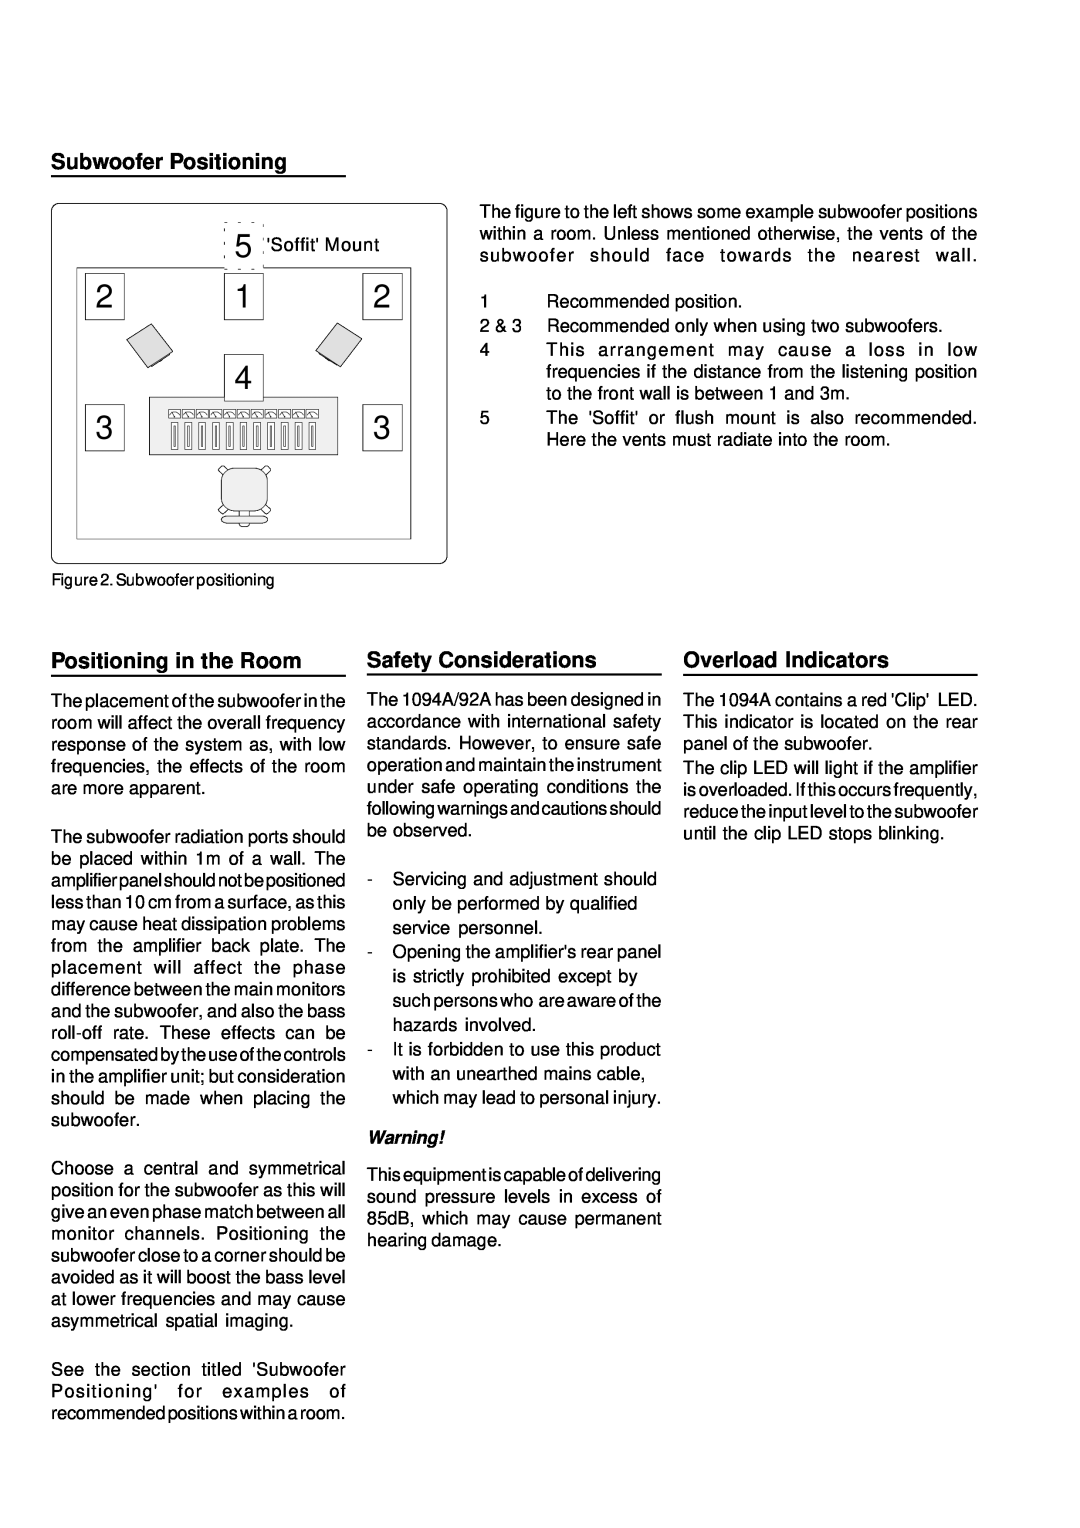 Genelec 1092A, 1094A manual Subwoofer Positioning, Positioning in the Room, Safety Considerations, Overload Indicators 